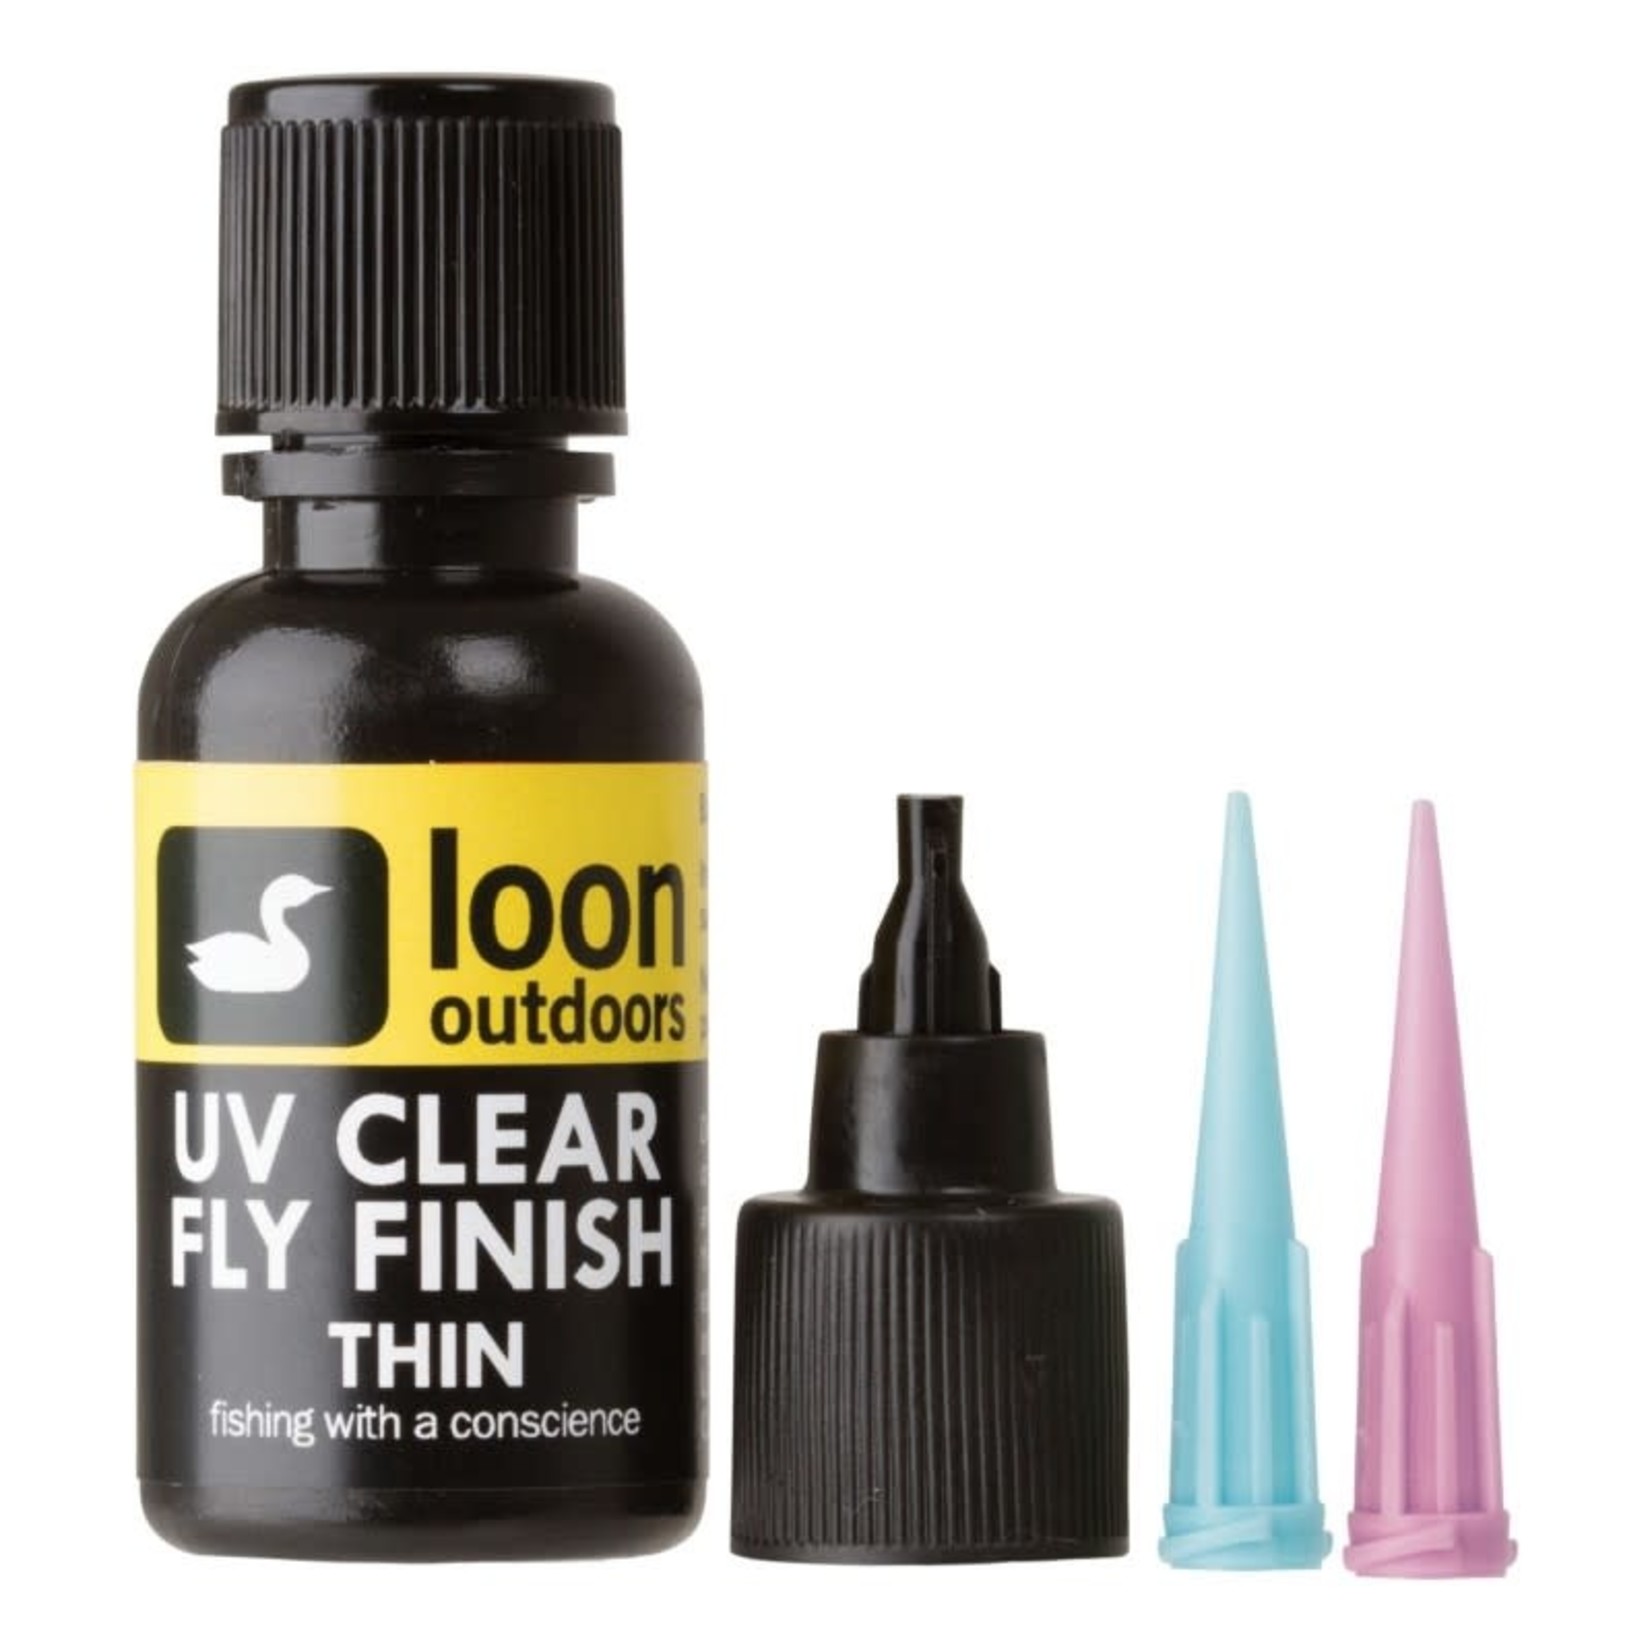 LOON OUTDOORS Loon Outdoors UV Clear Fly Finish, Thin- 0.5 fl oz bottle